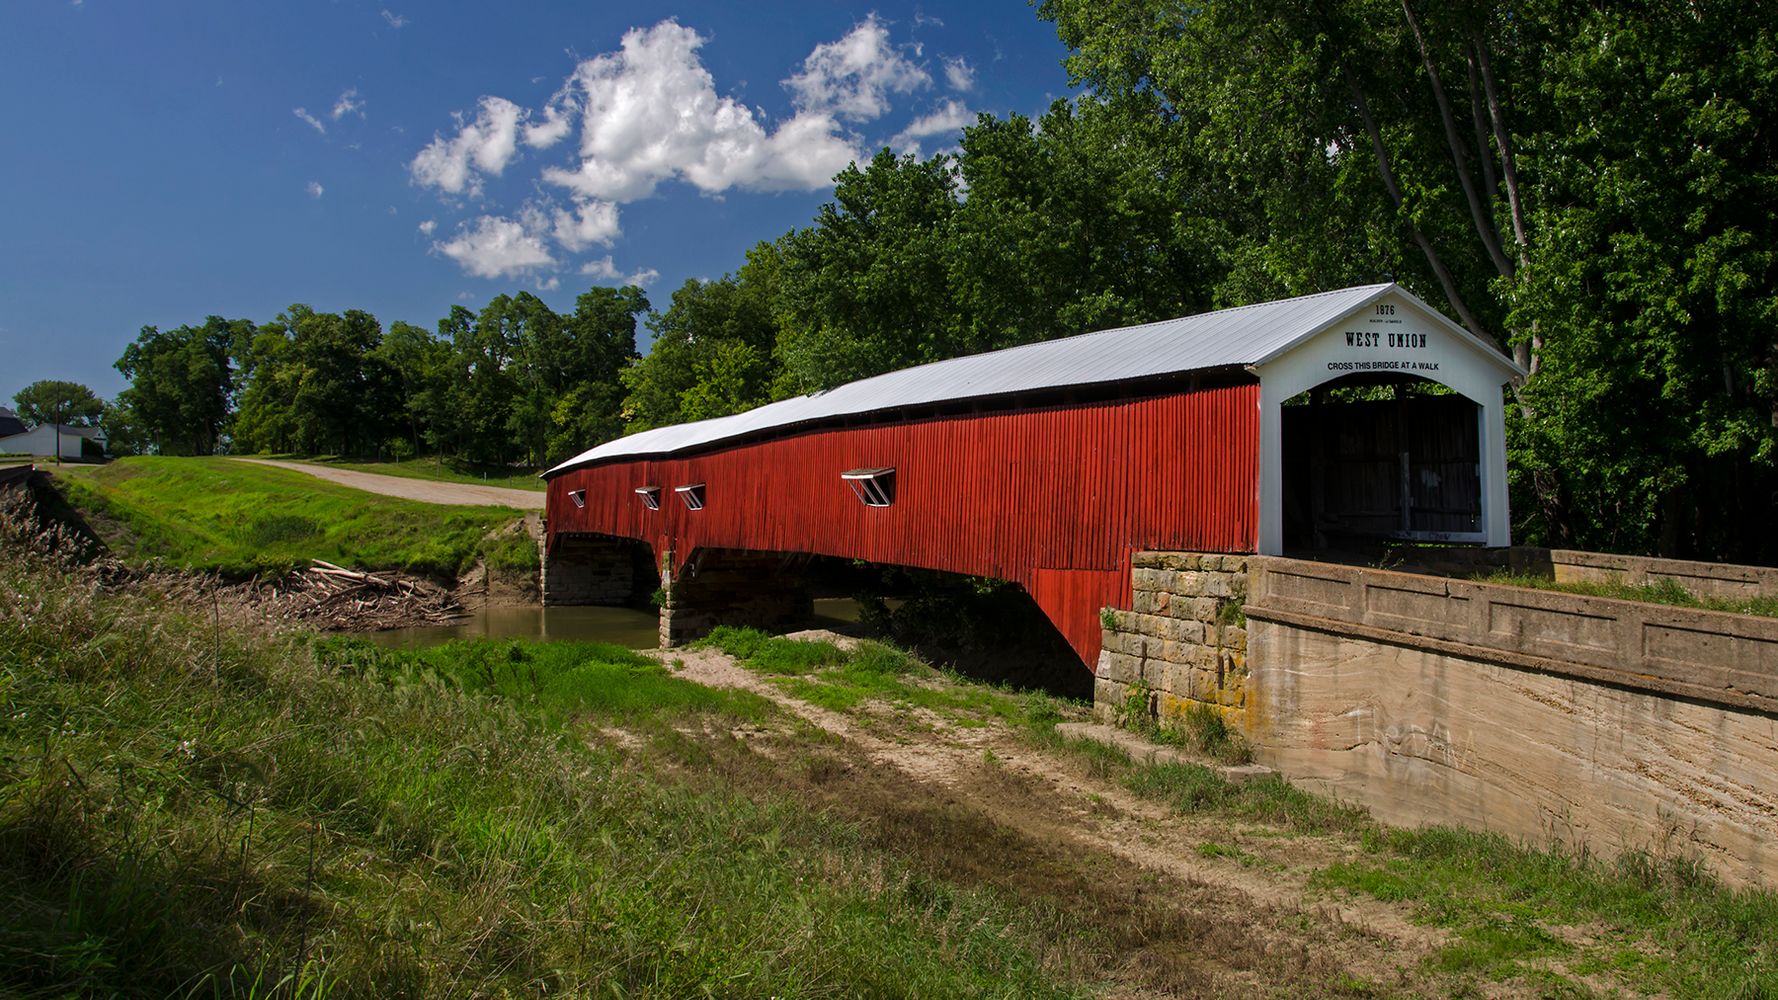 Covering History The Historic Covered Bridges of Parke County, Indiana